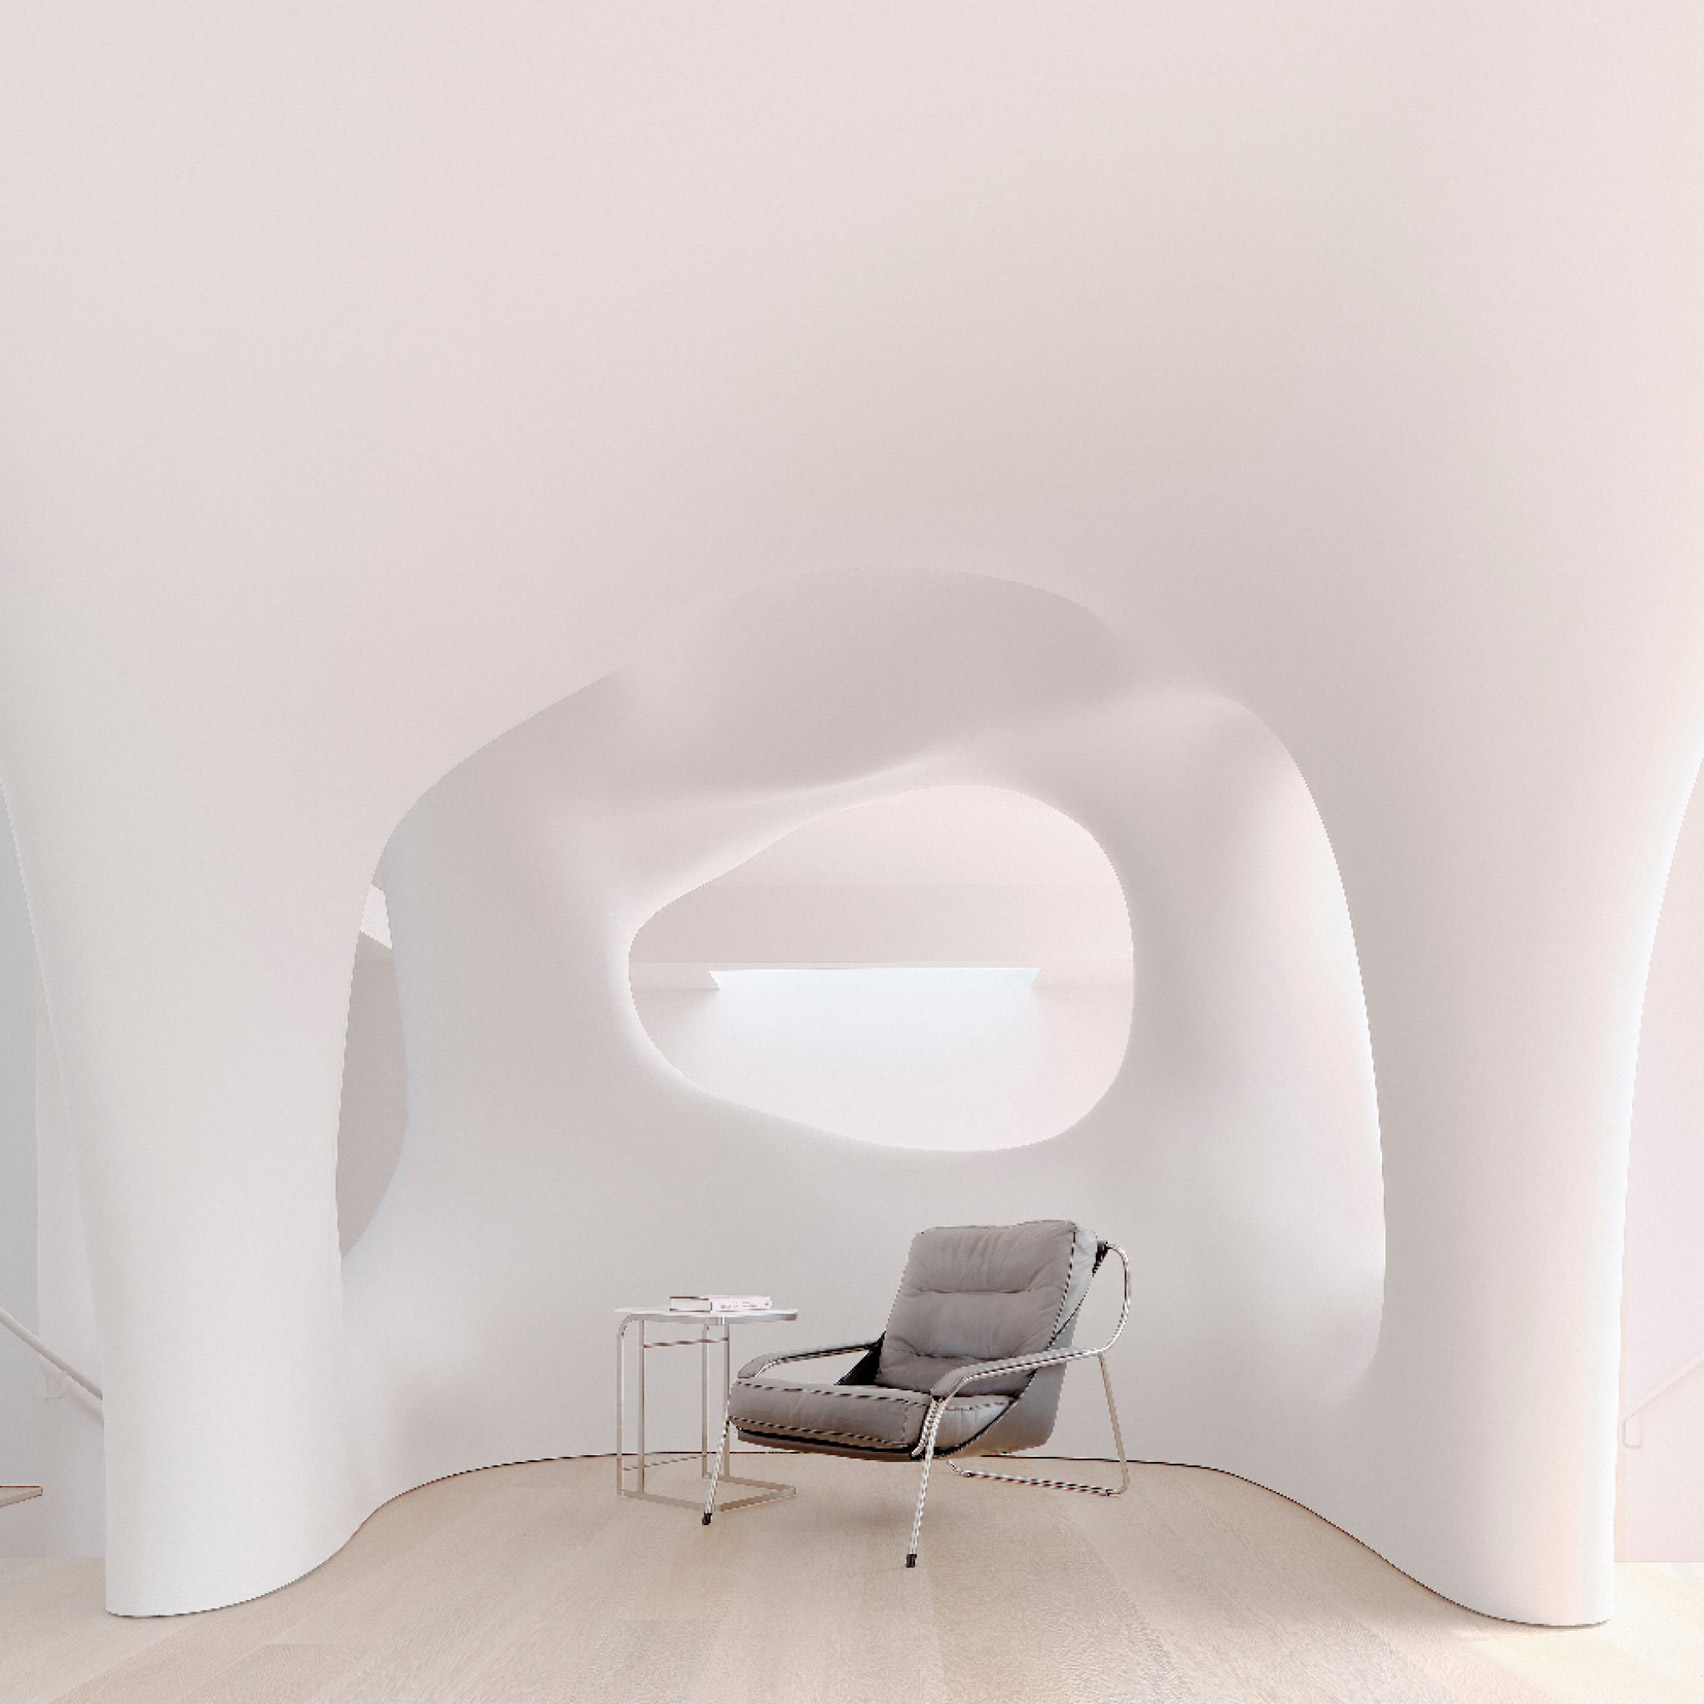 Seating nook of Softie house enclosed by undulating white walls